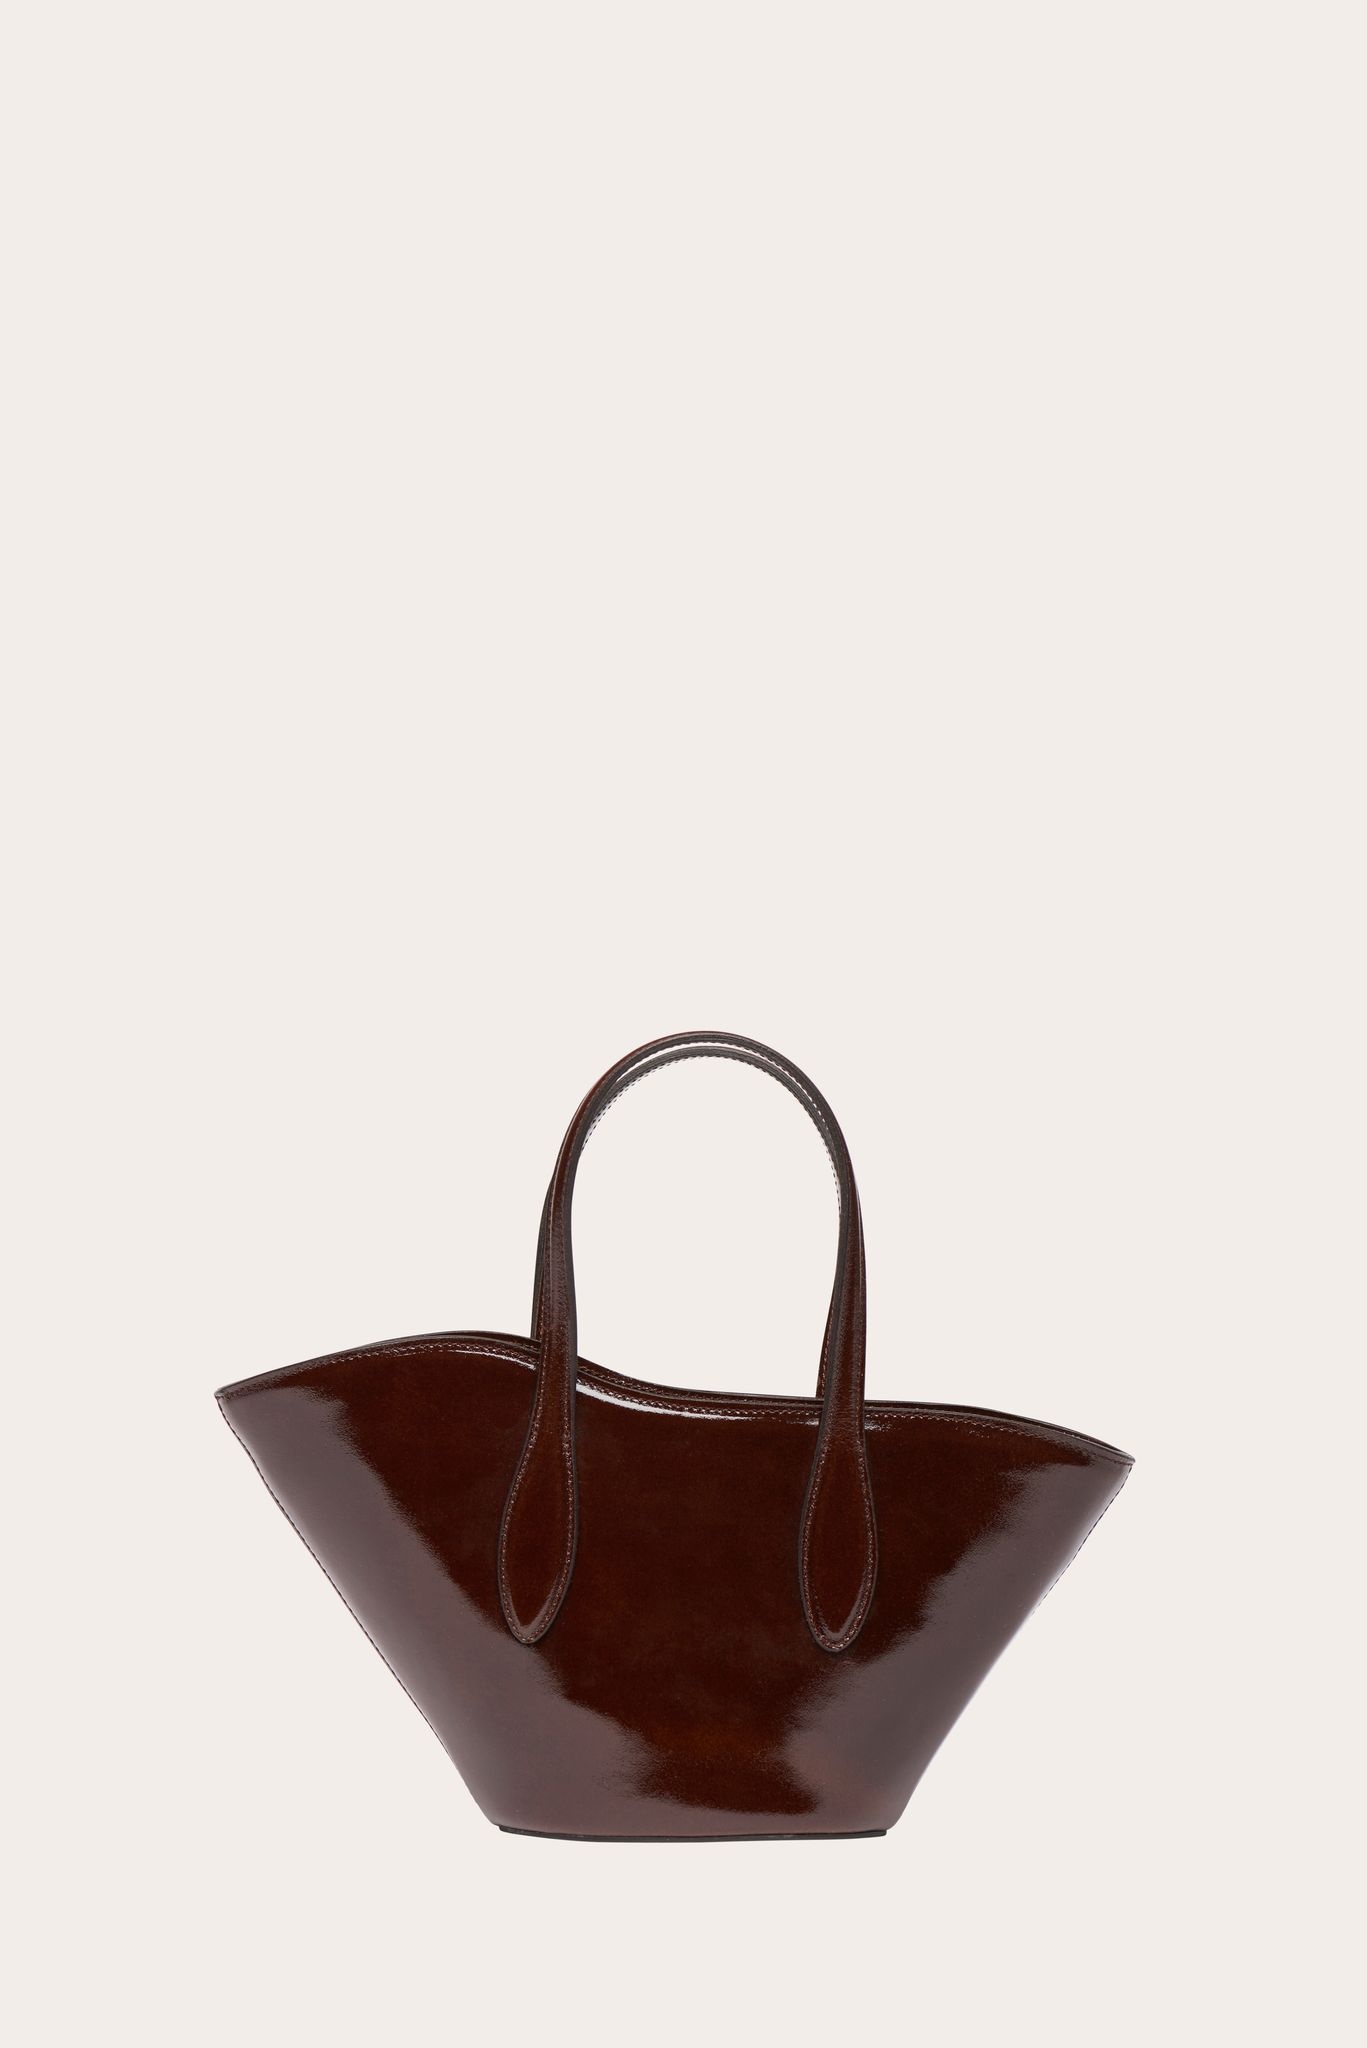 Little Liffner's Minimalist Bags Are Functional And Trendy